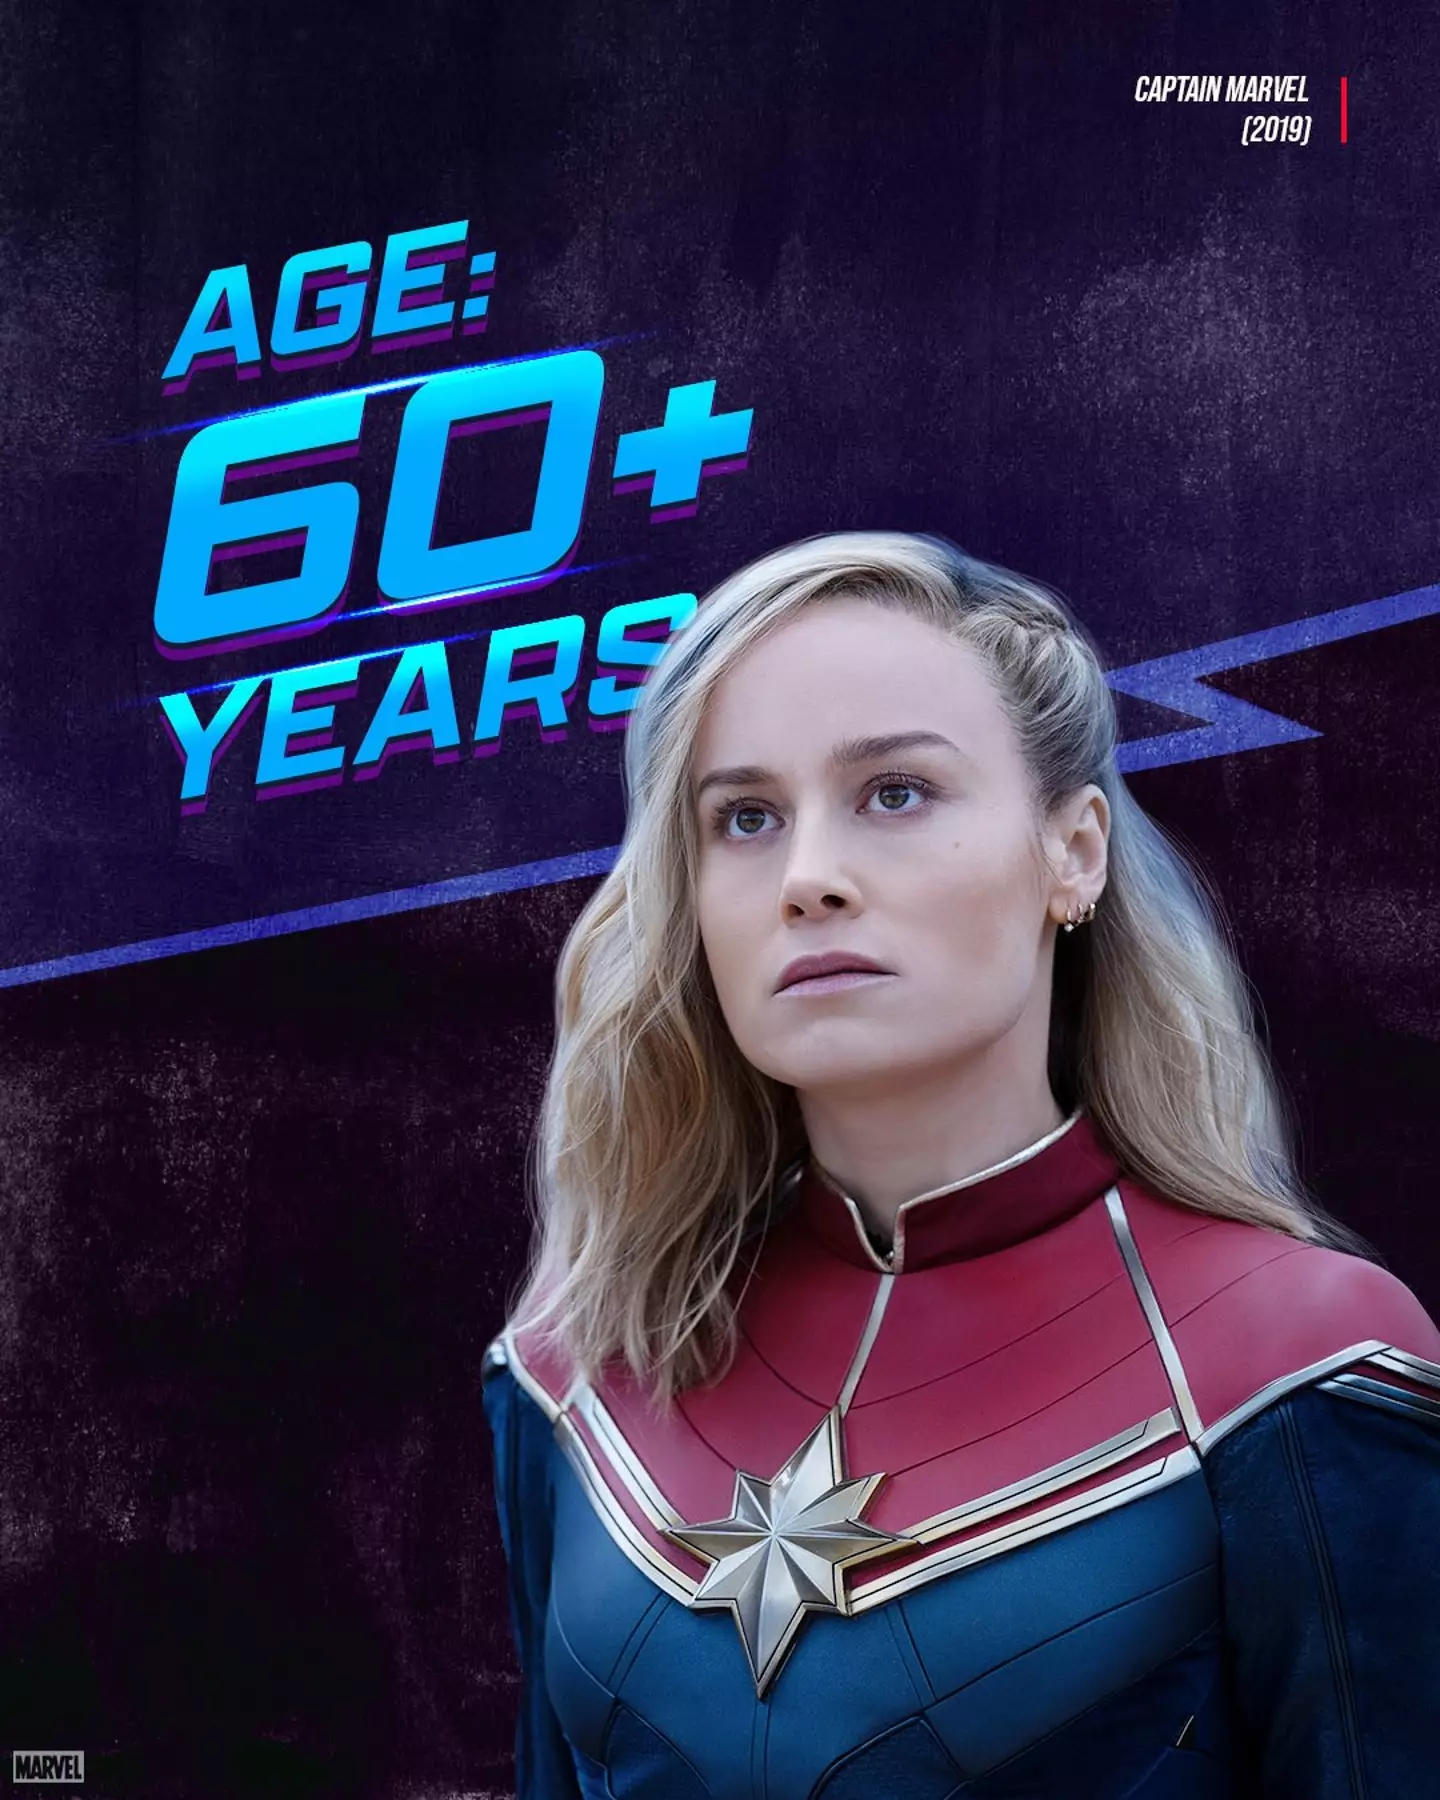 The real age of Captain Marvel.